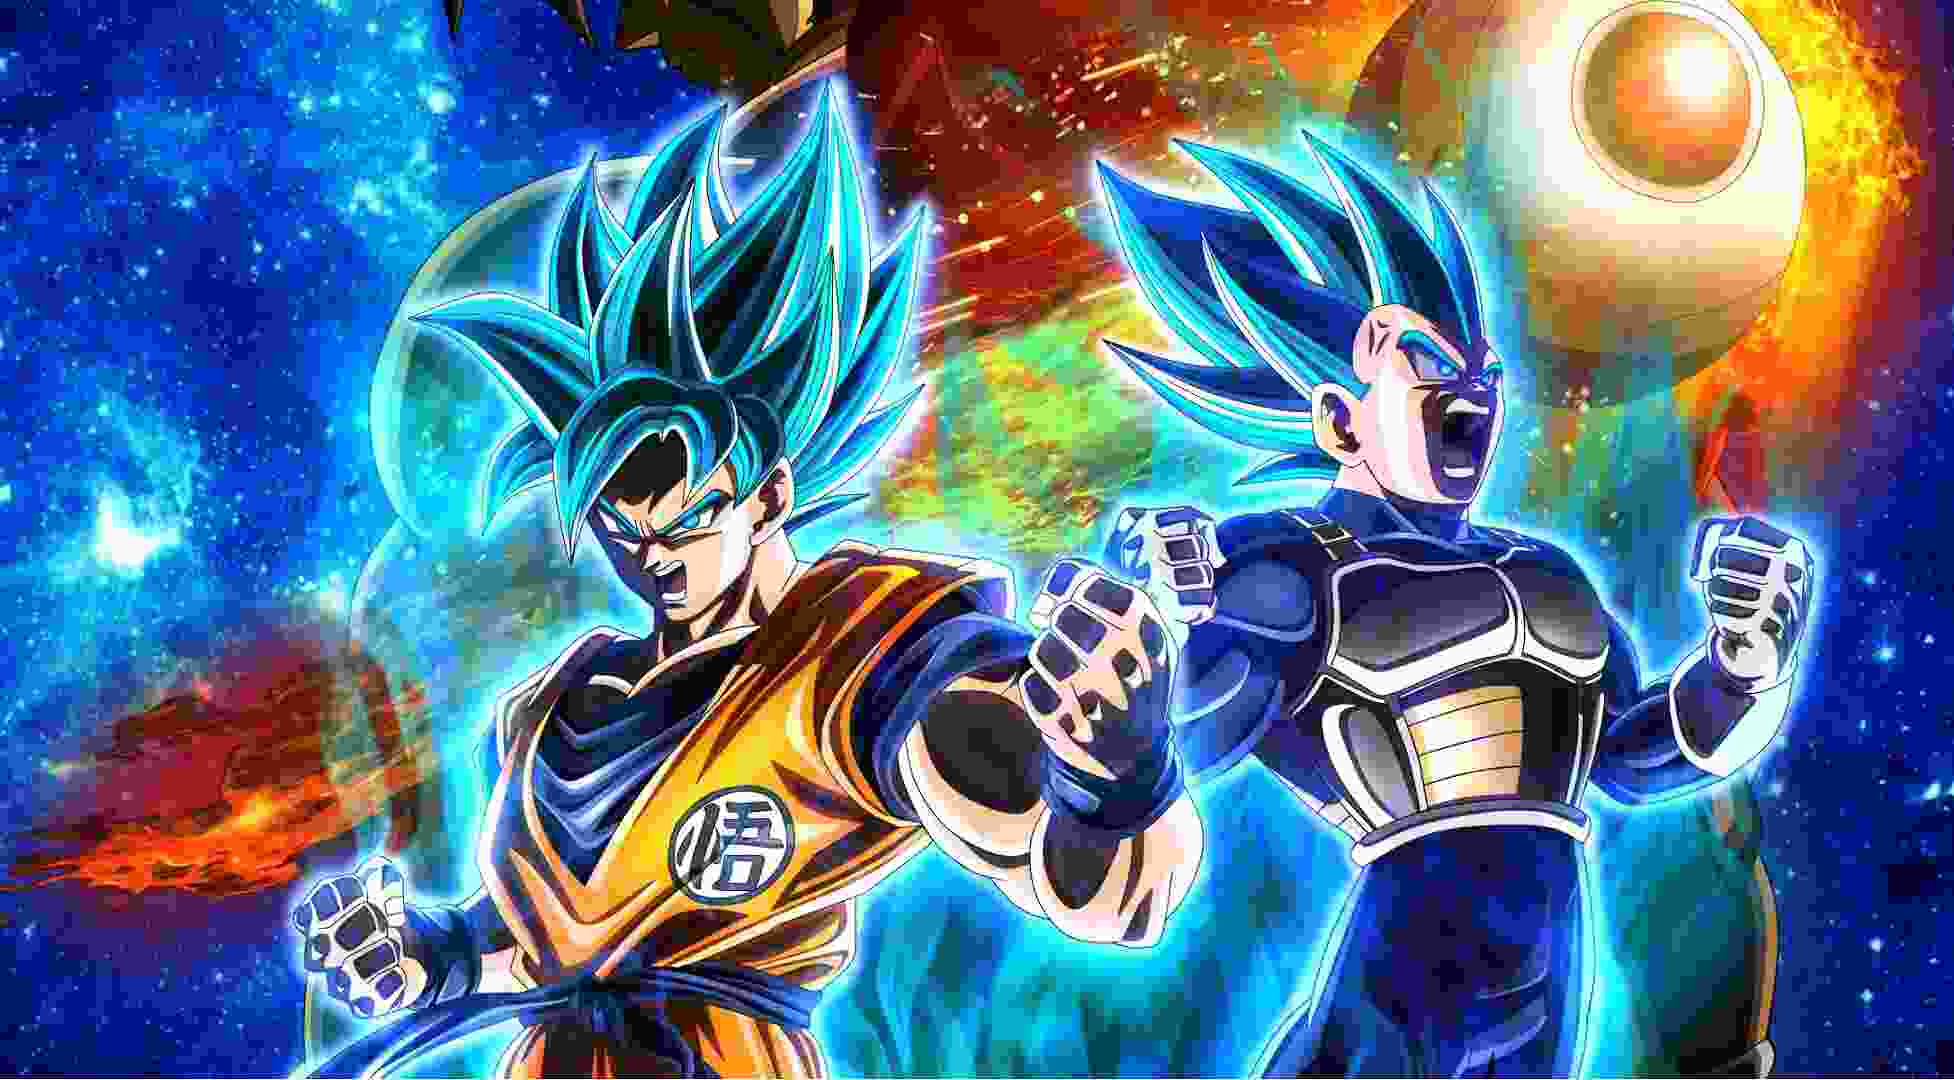 Dragon Ball Super Chapitre 90 Plot, Preview, New Release Date & Synopsis